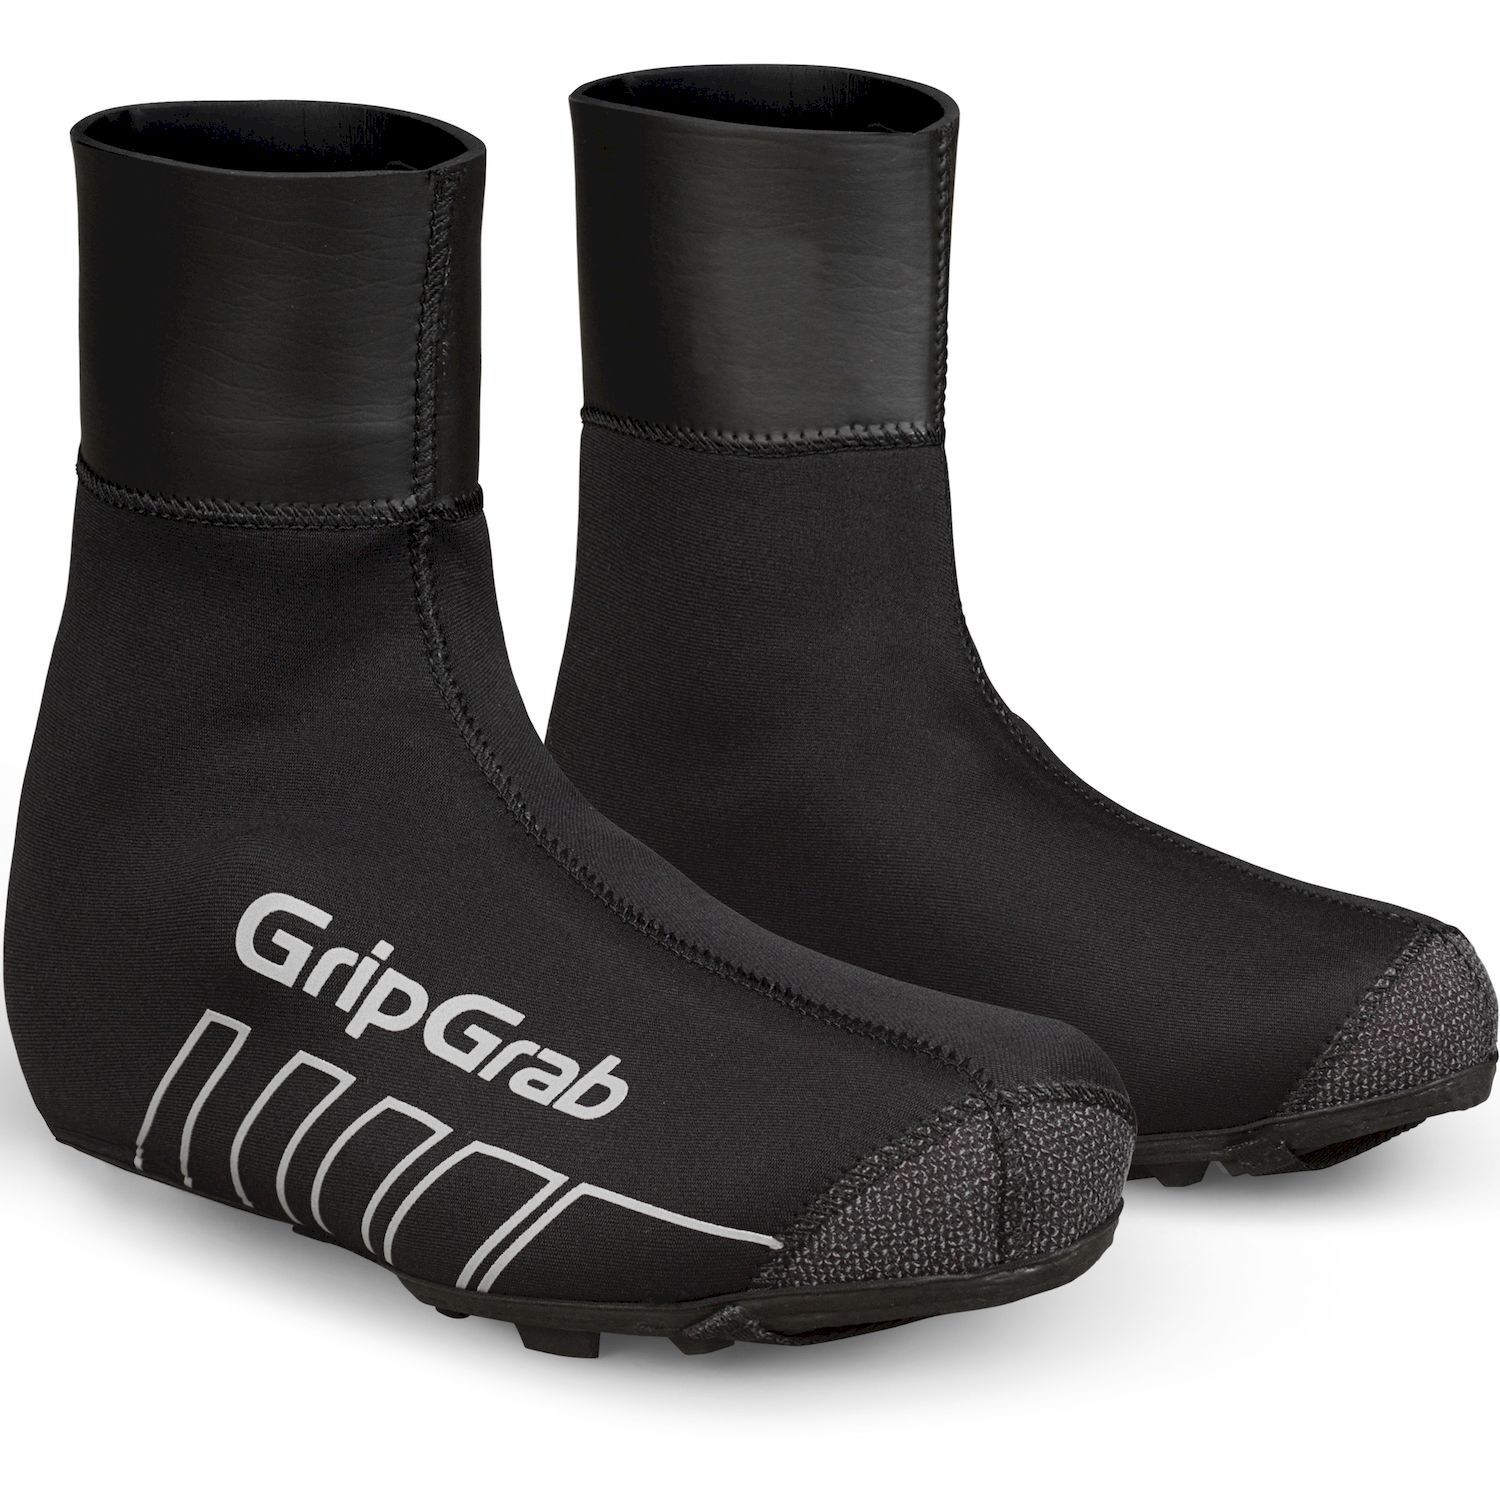 GripGrab RaceThermo X Waterproof Winter MTB/CX Shoe Covers - Sur-chaussures vélo | Hardloop